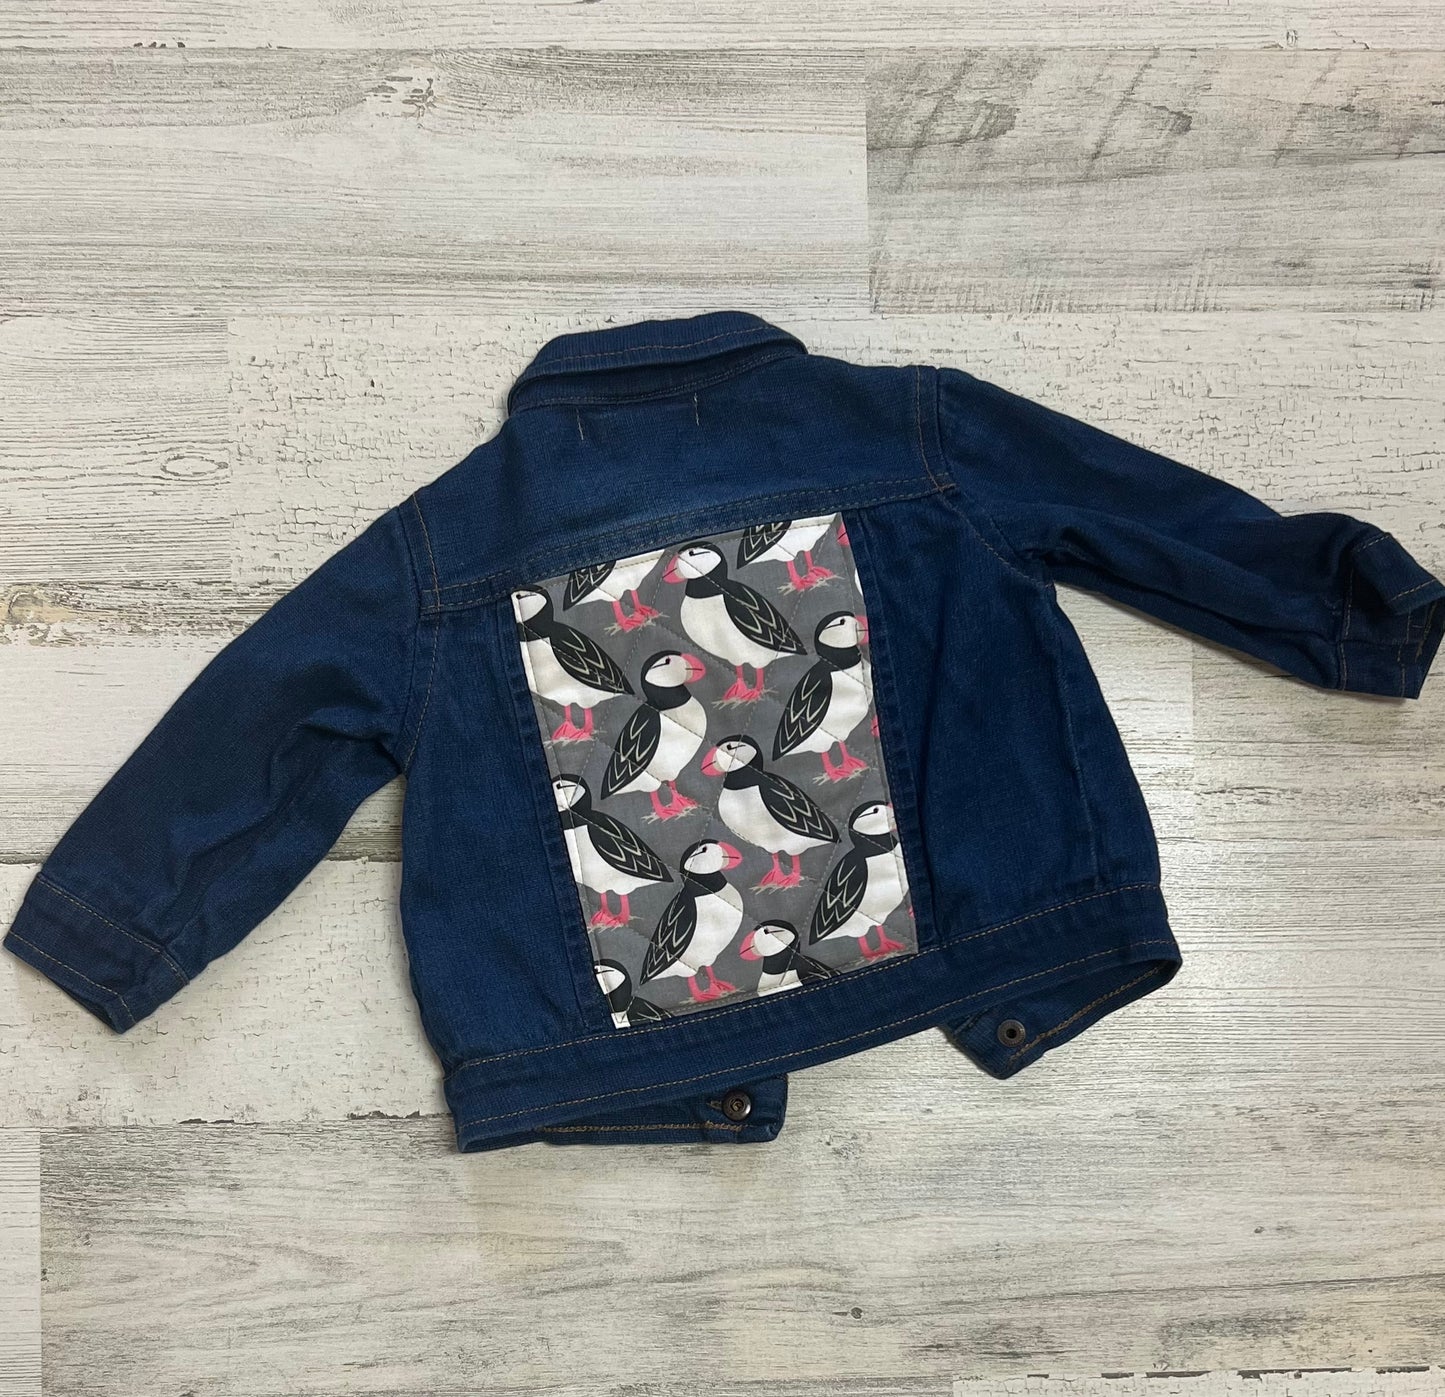 Lucky Stitches “Penny” (3-6 month snap jacket)